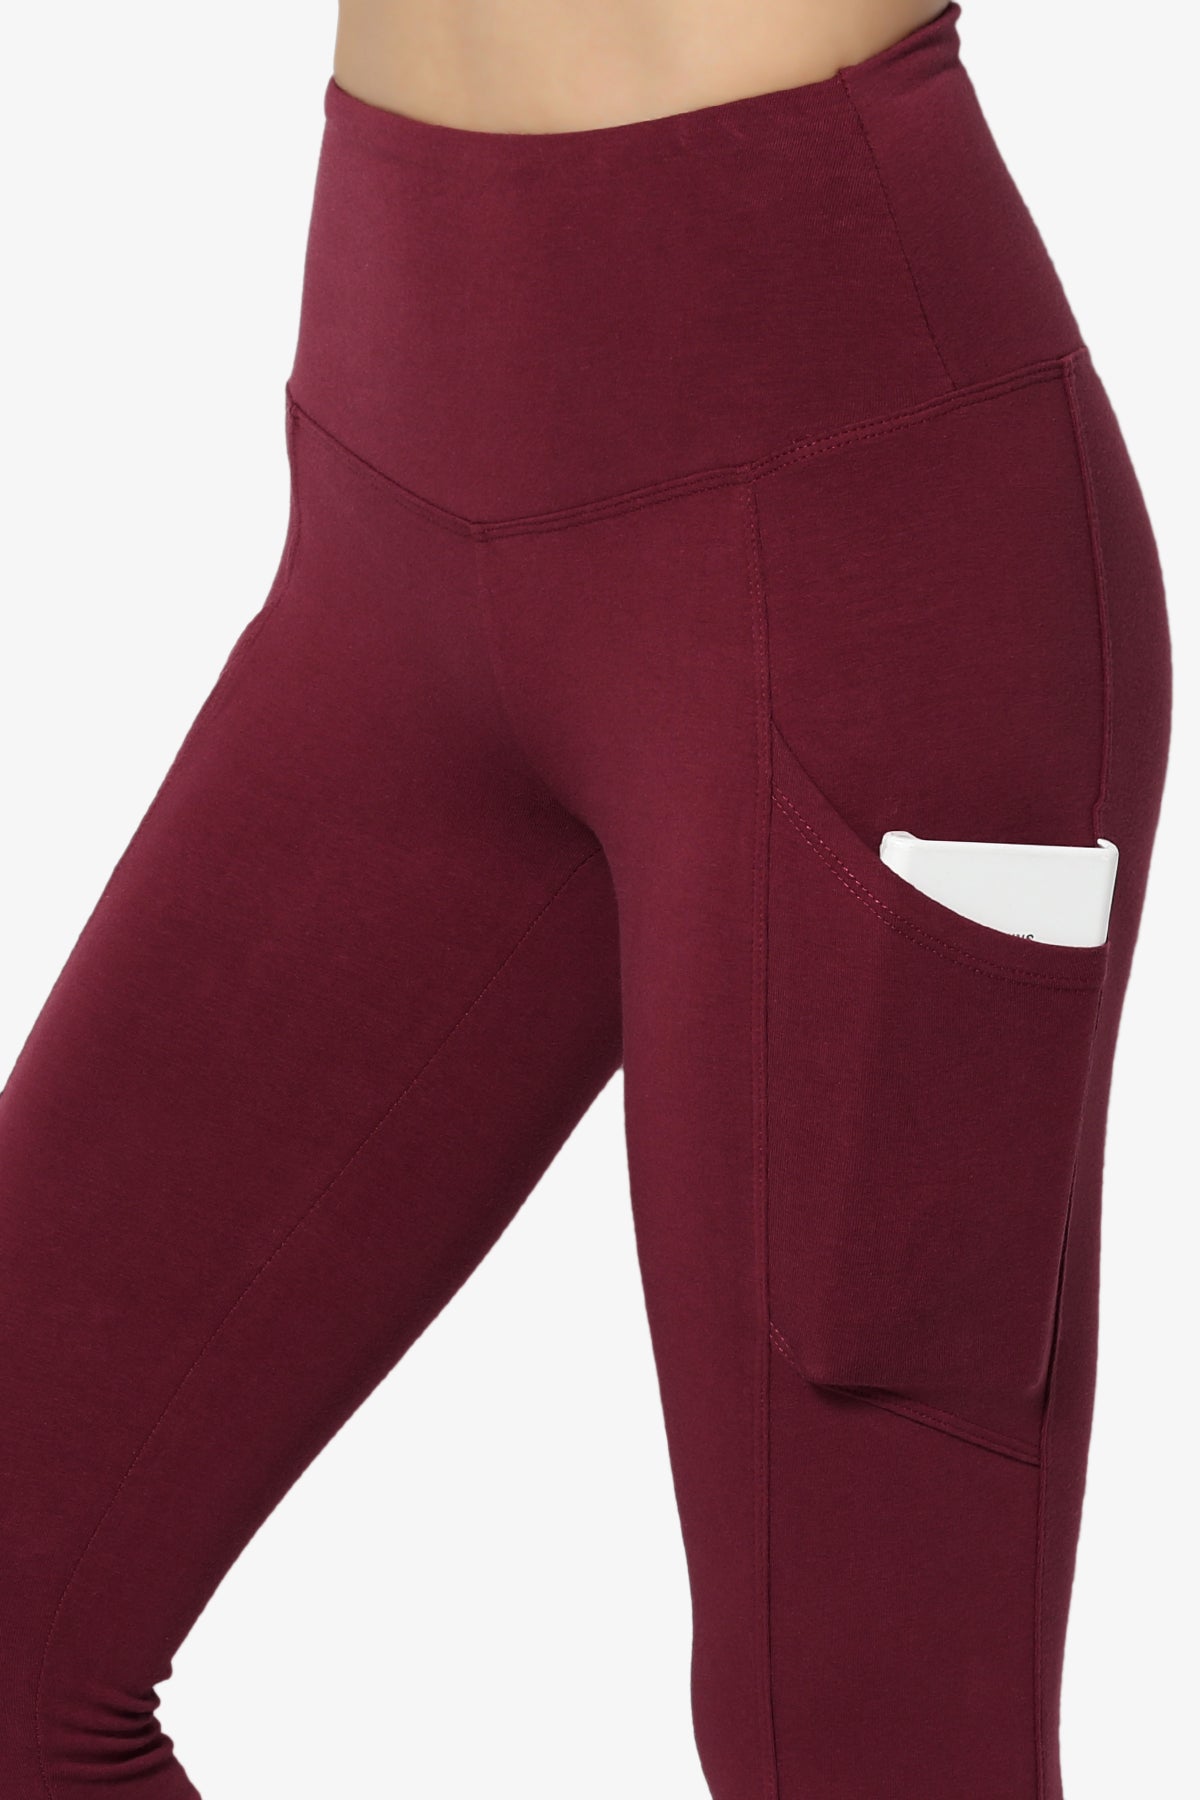 Load image into Gallery viewer, Ansley Luxe Cotton Leggings with Pockets DARK BURGUNDY_5
